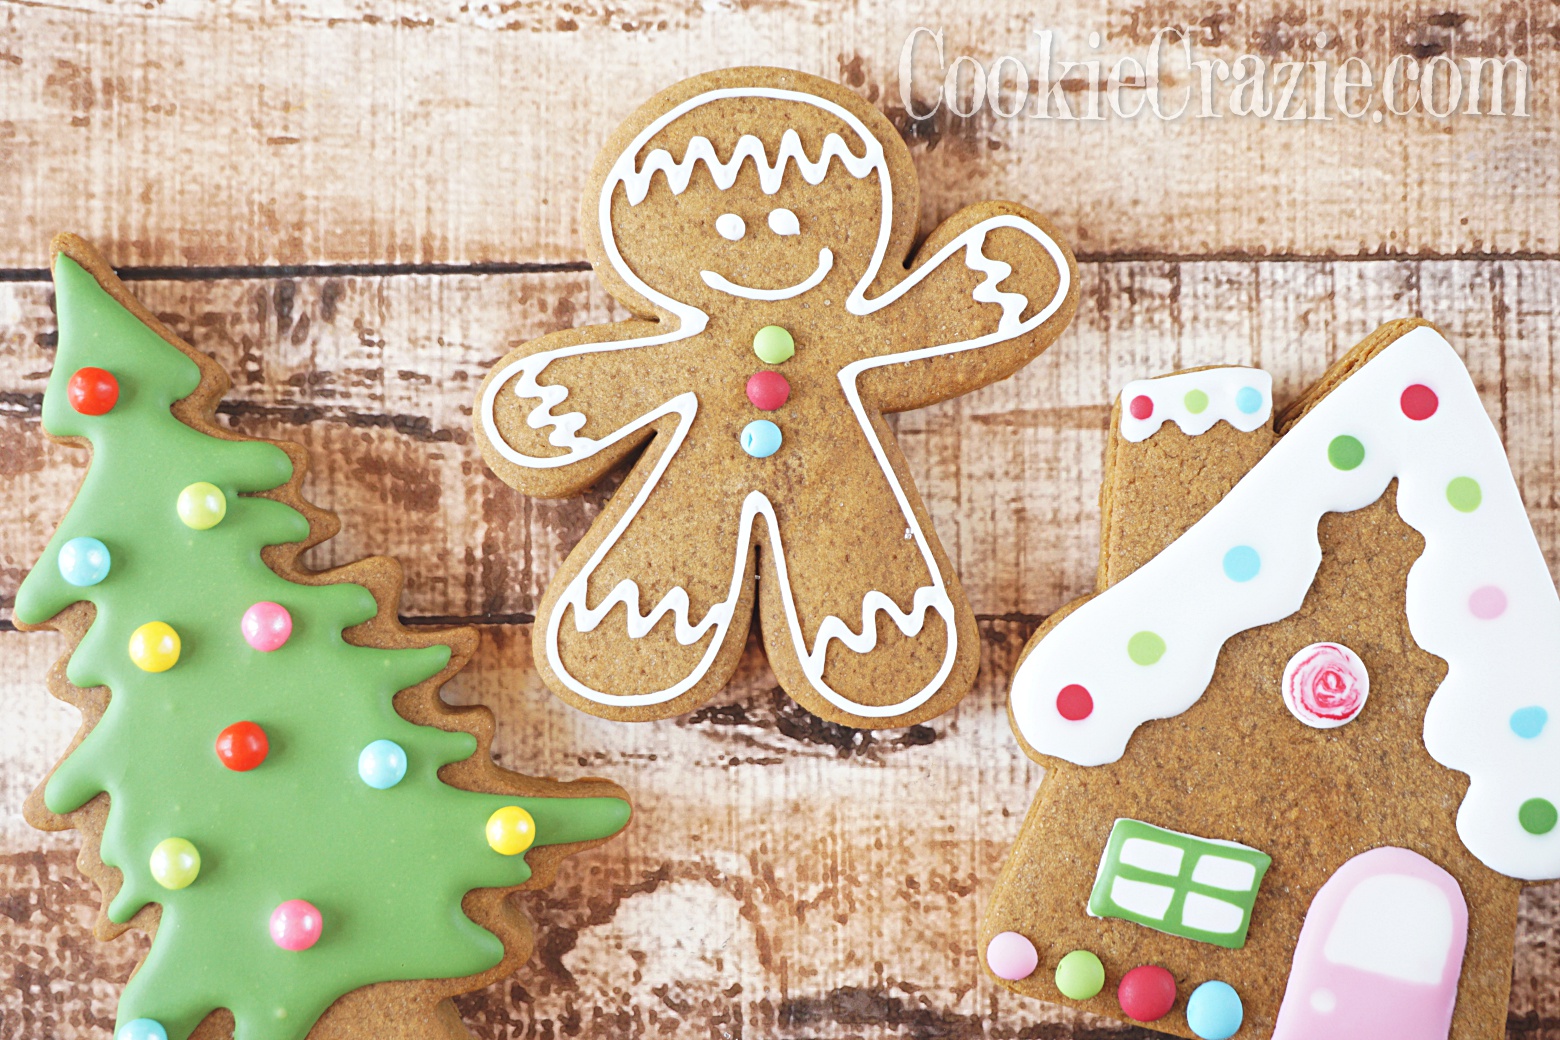  Gingerbread Man Decorated Sugar Cookie YouTube video  HERE  